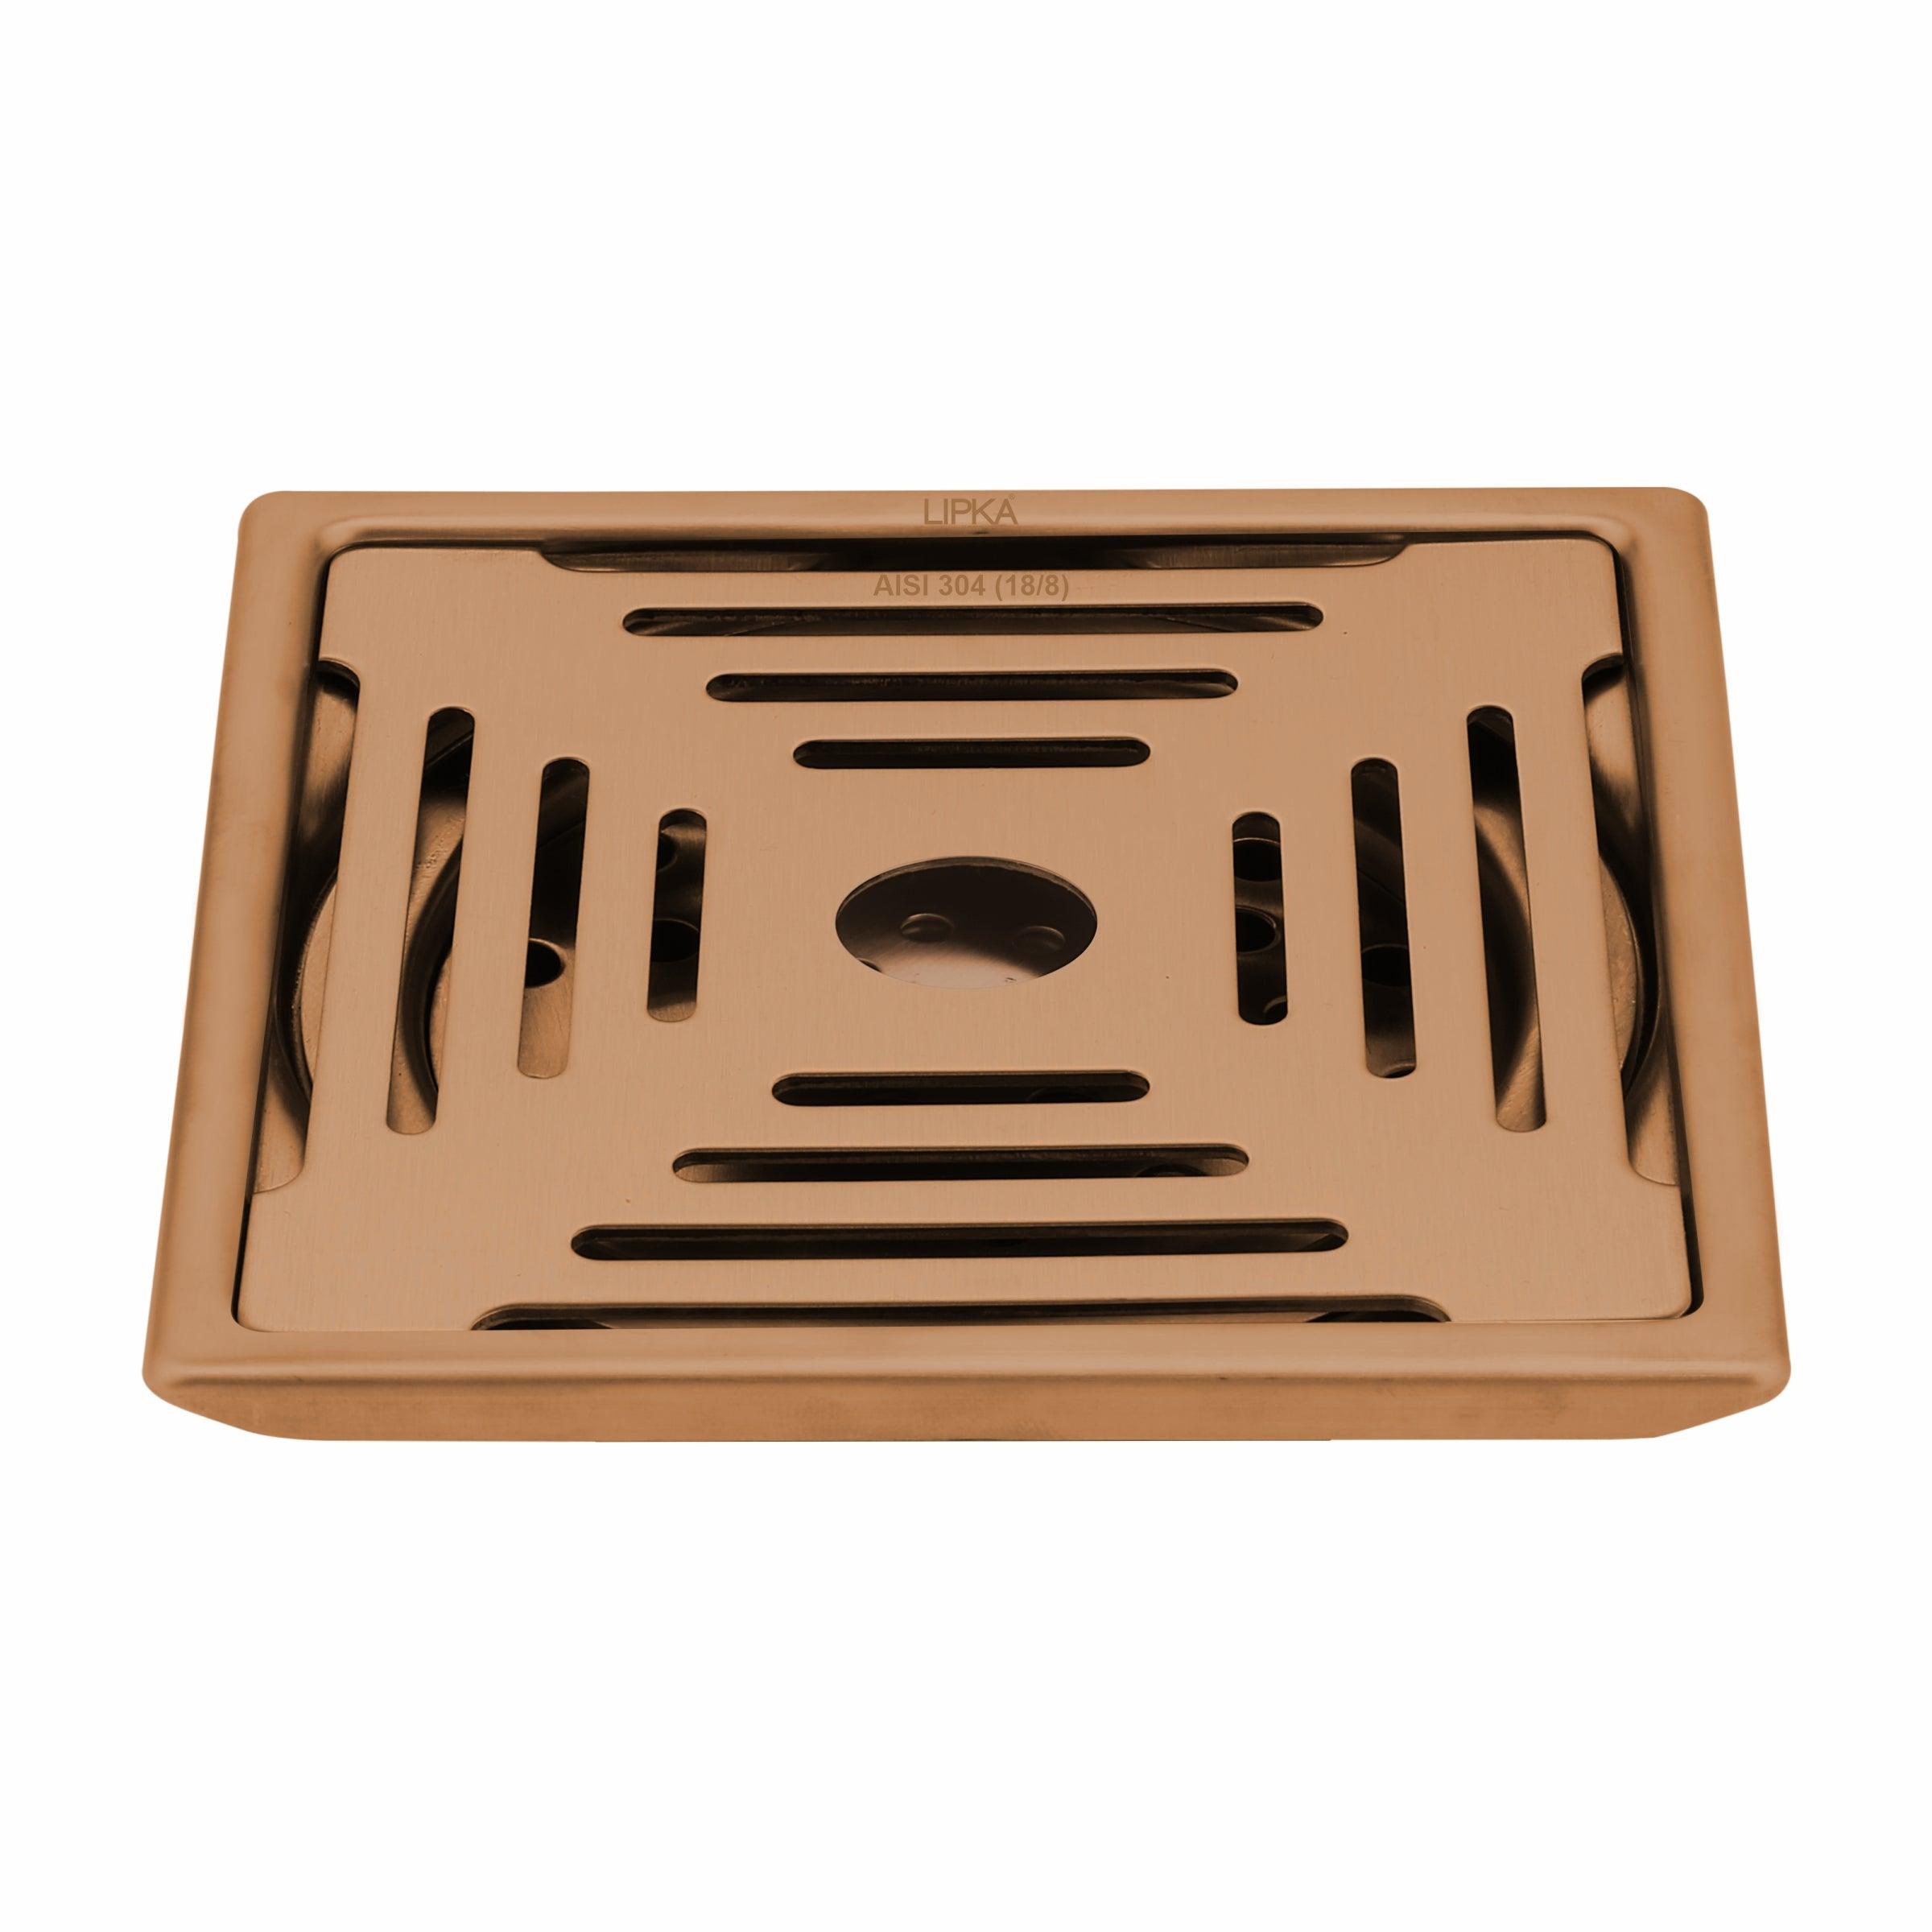 Green Exclusive Square Floor Drain in Antique Copper PVD Coating (6 x 6 Inches) with Hole